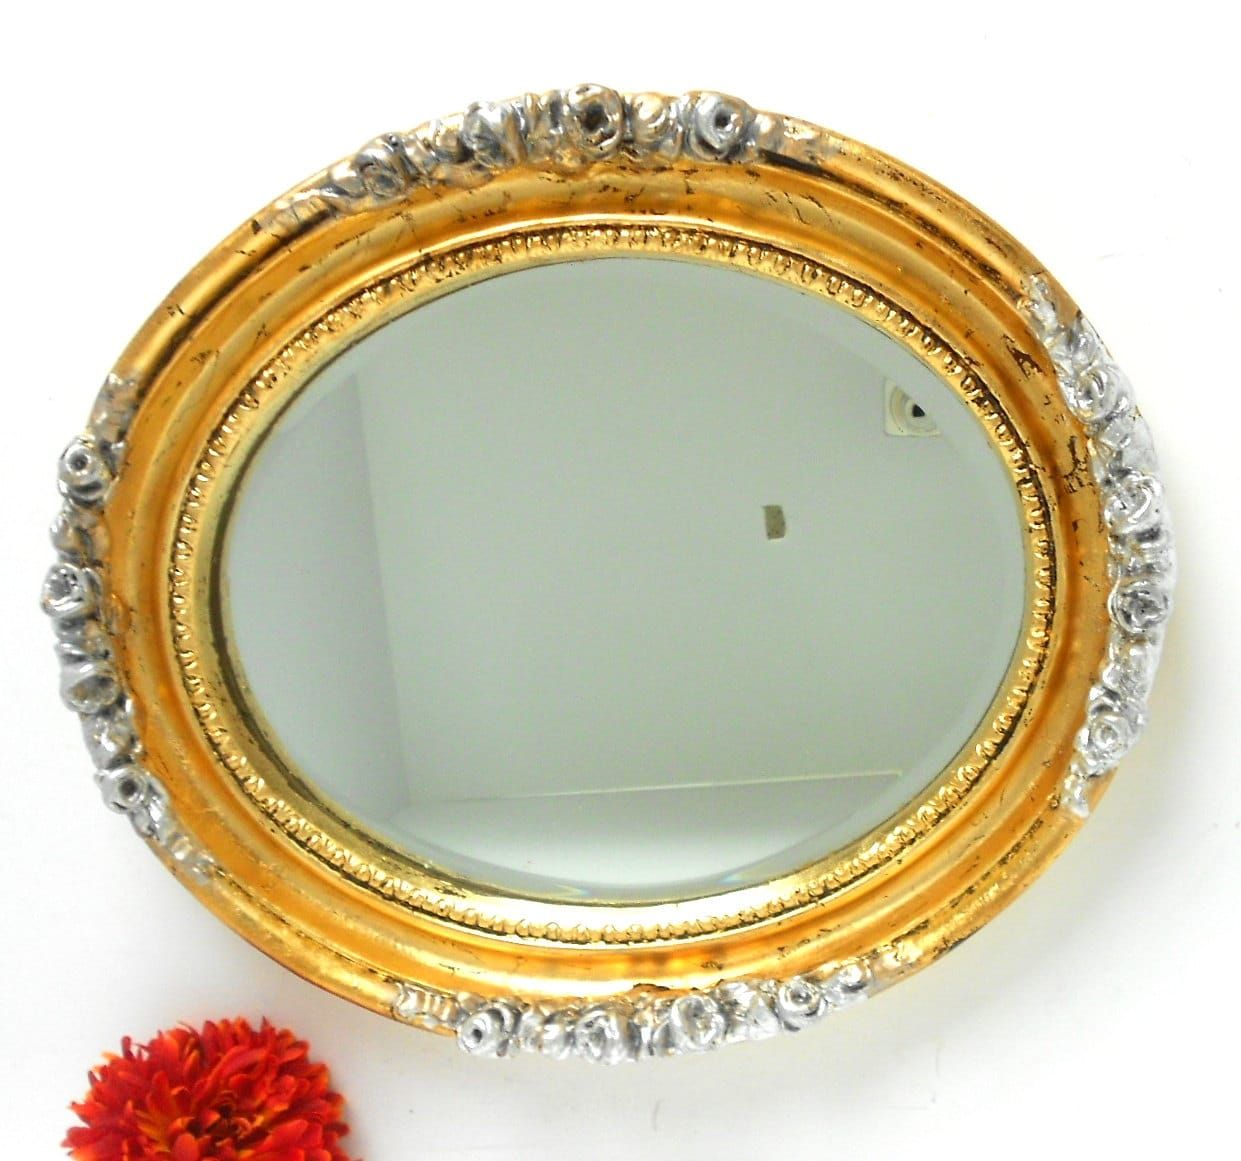 Mirror Large Oval Mirror Gold Mirror Oval Wall Mirror Throughout Oval Wide Lip Wall Mirrors (View 13 of 15)